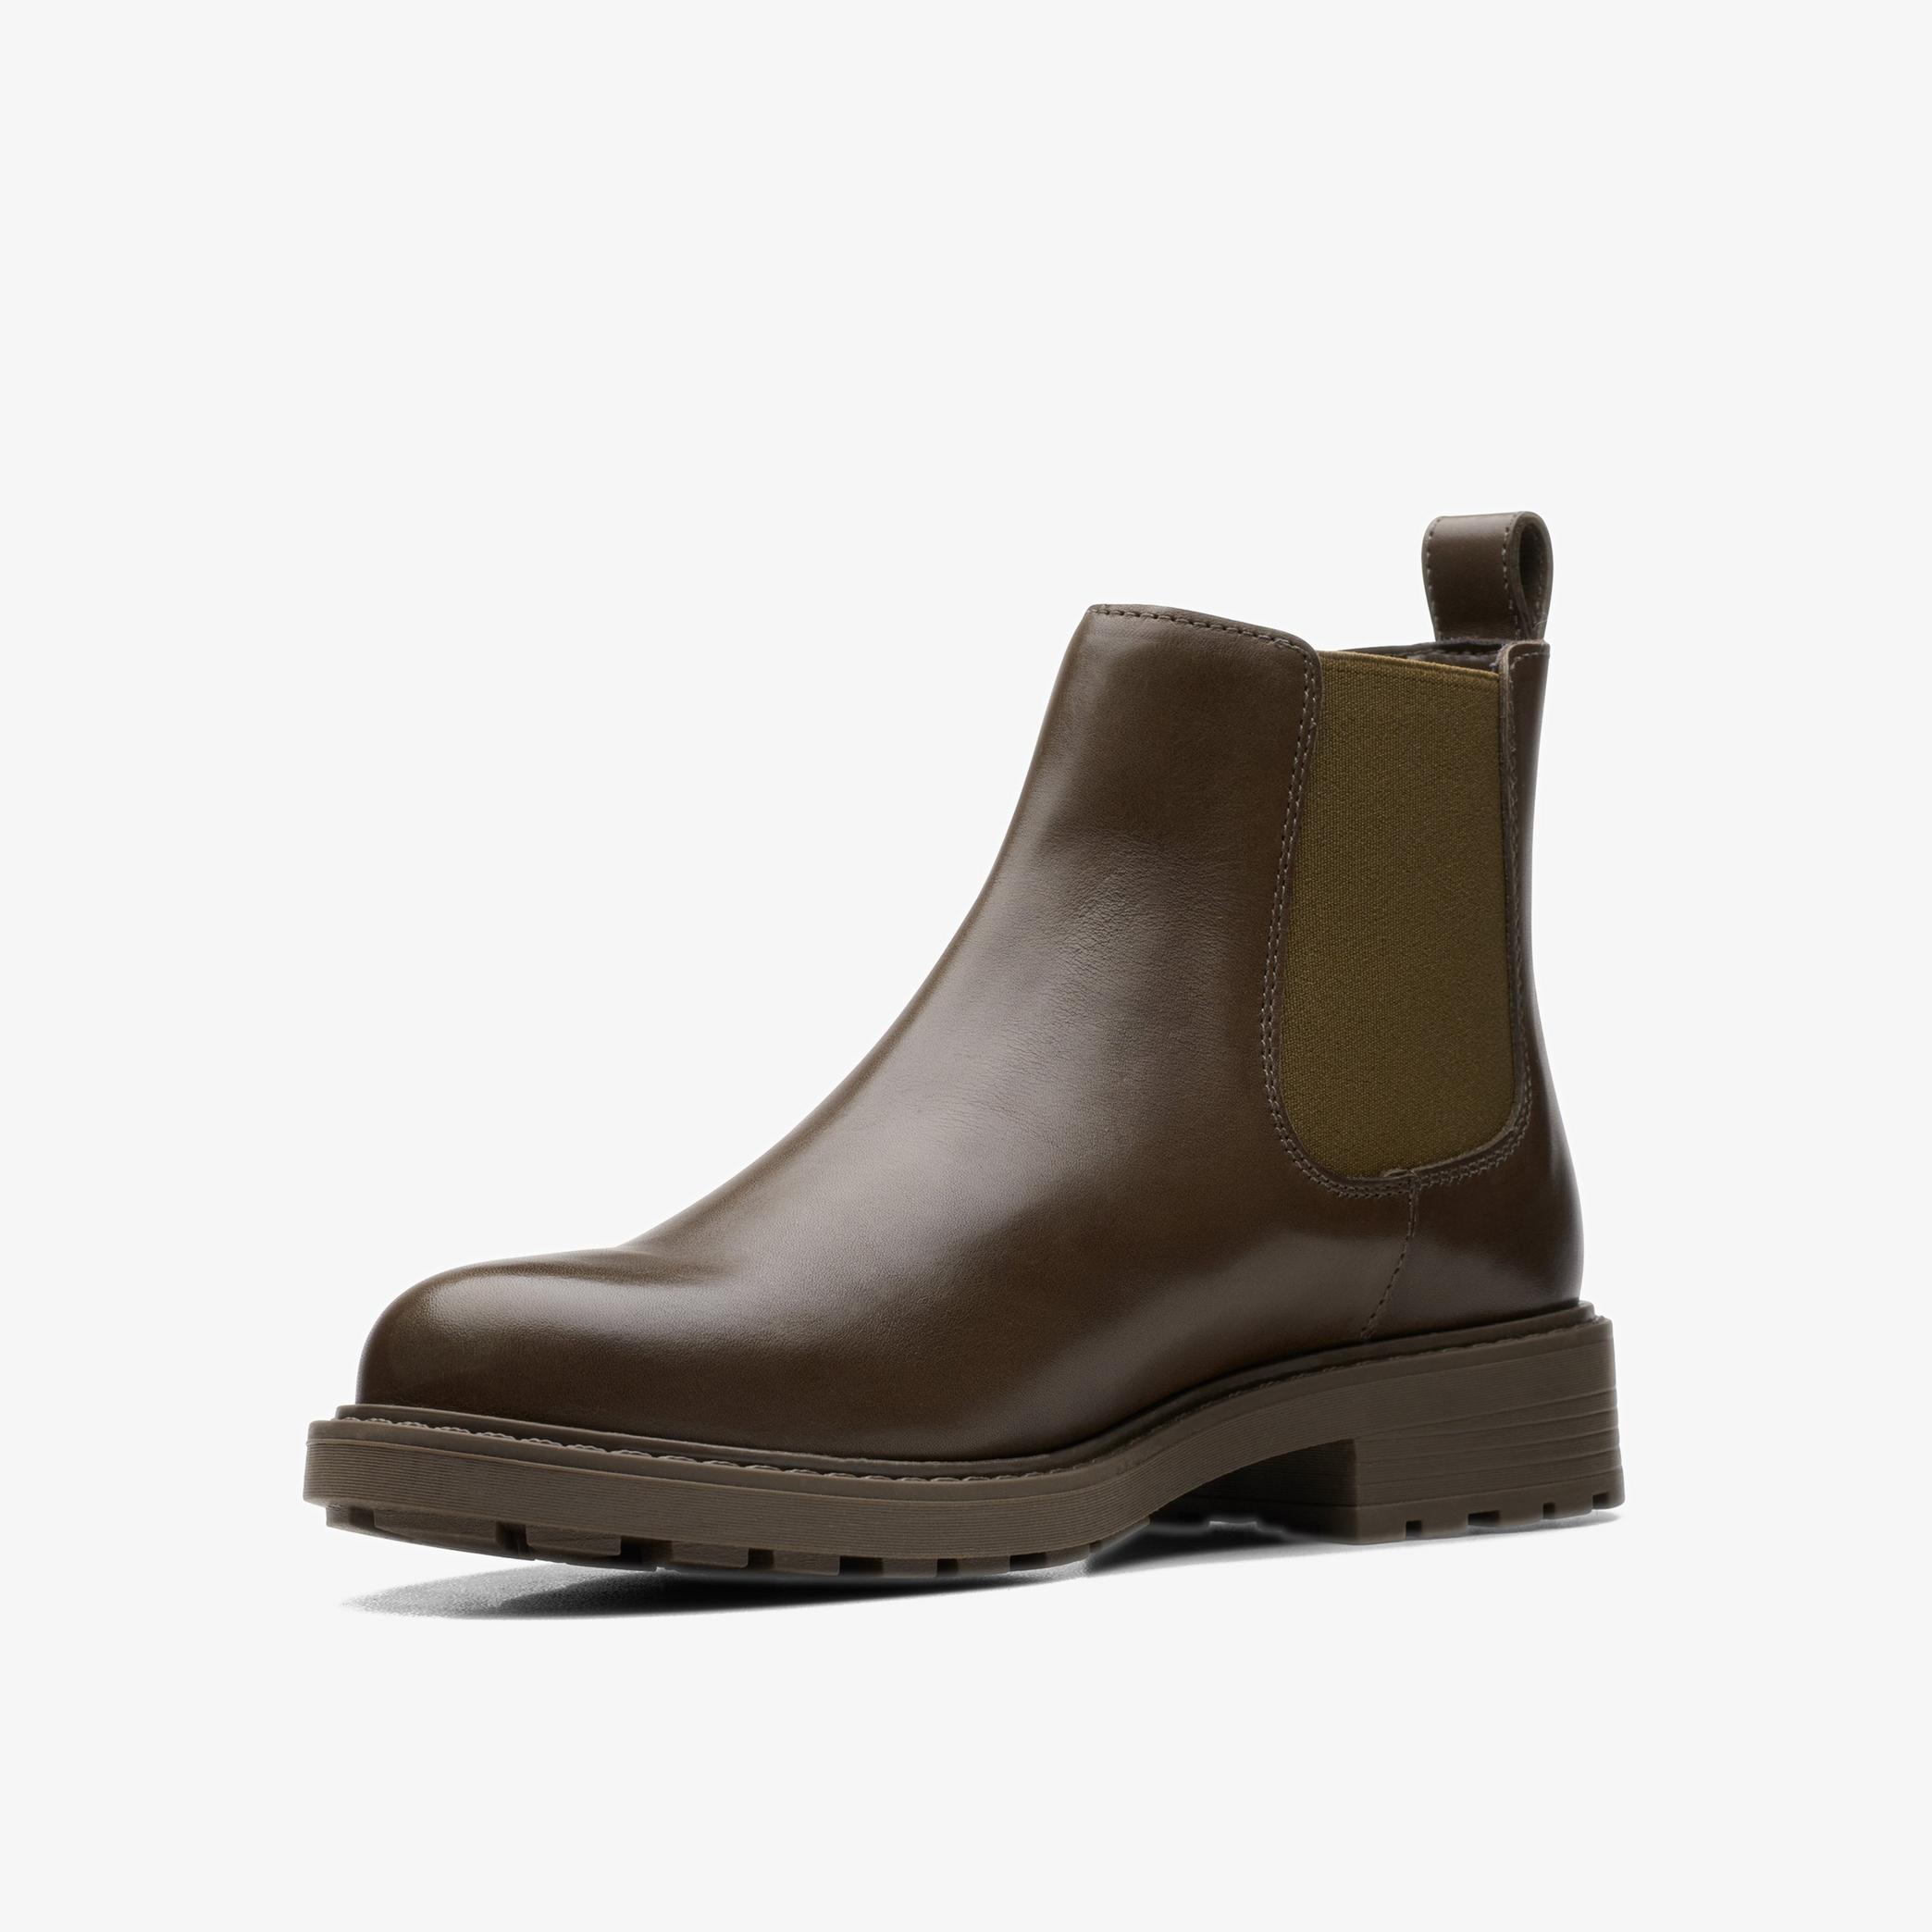 Orinoco2 Lane Dark Olive Leather Ankle Boots, view 4 of 6